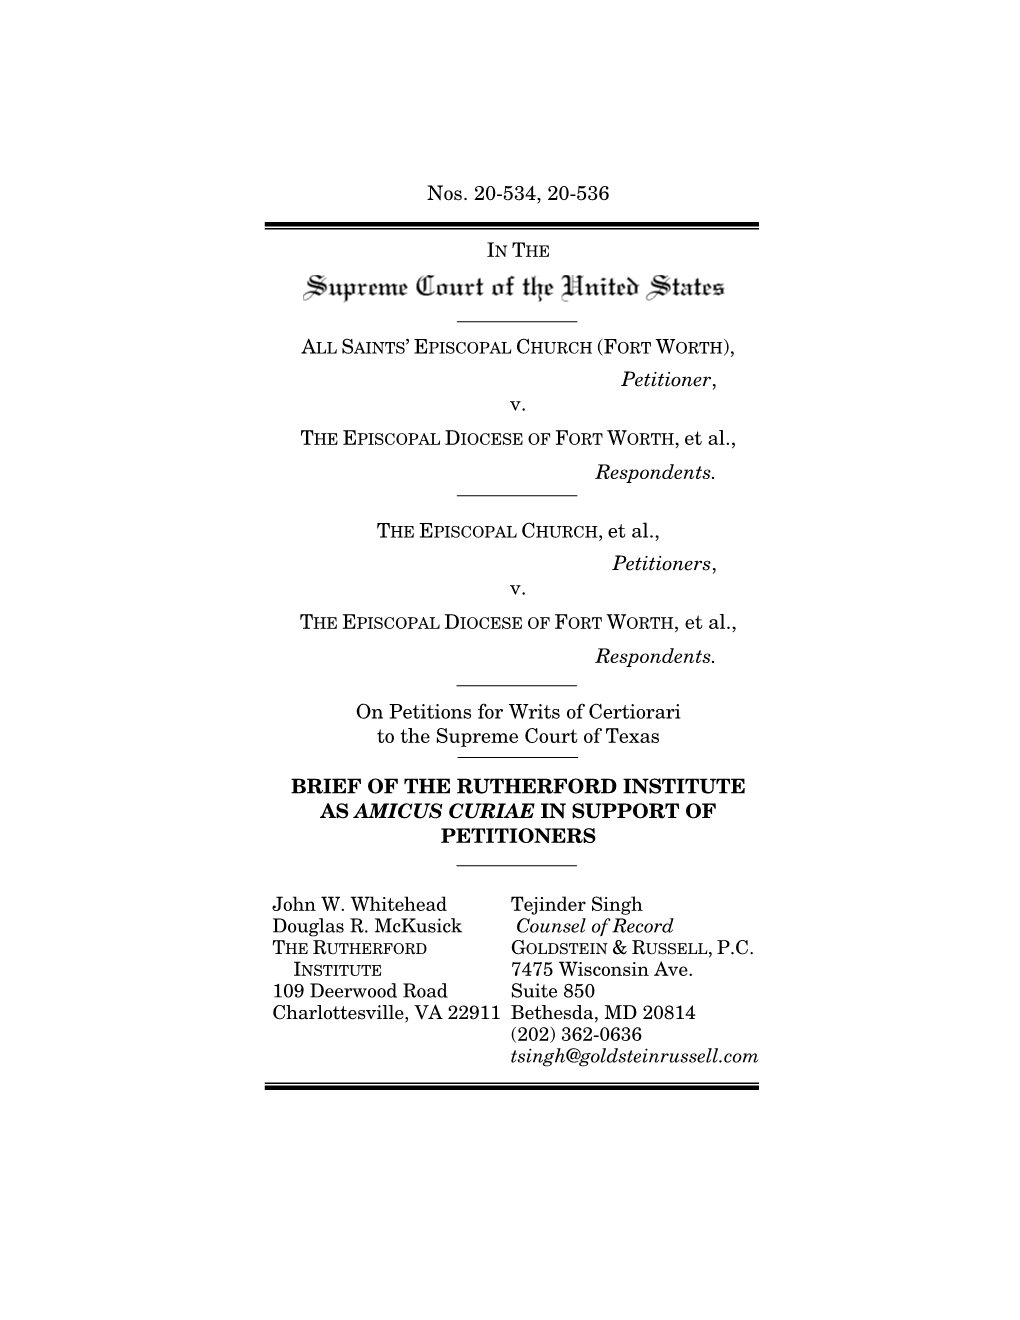 Rutherford Institute As Amicus Curiae in Support of Petitioners